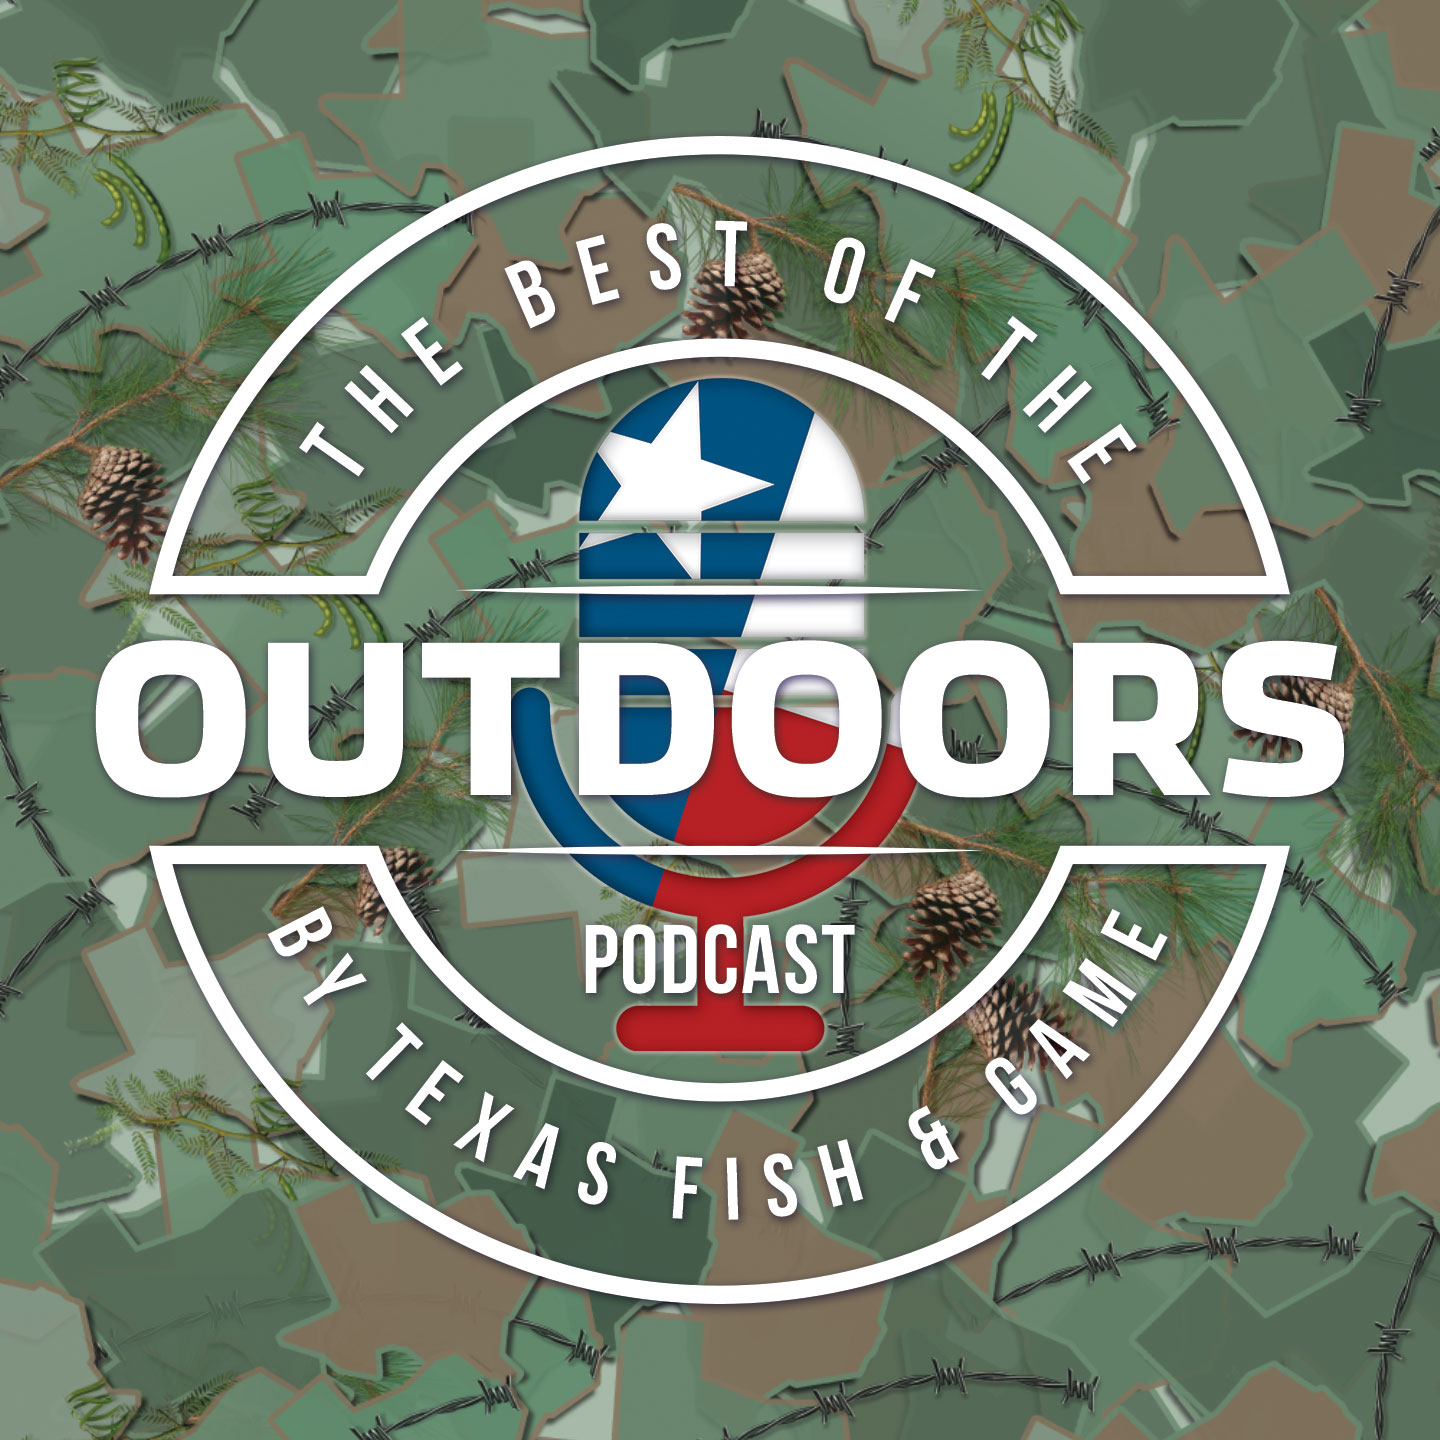 NRA Show Coverage in Dallas: Optics, Ammo, Airguns and More with Host Dustin Warncke